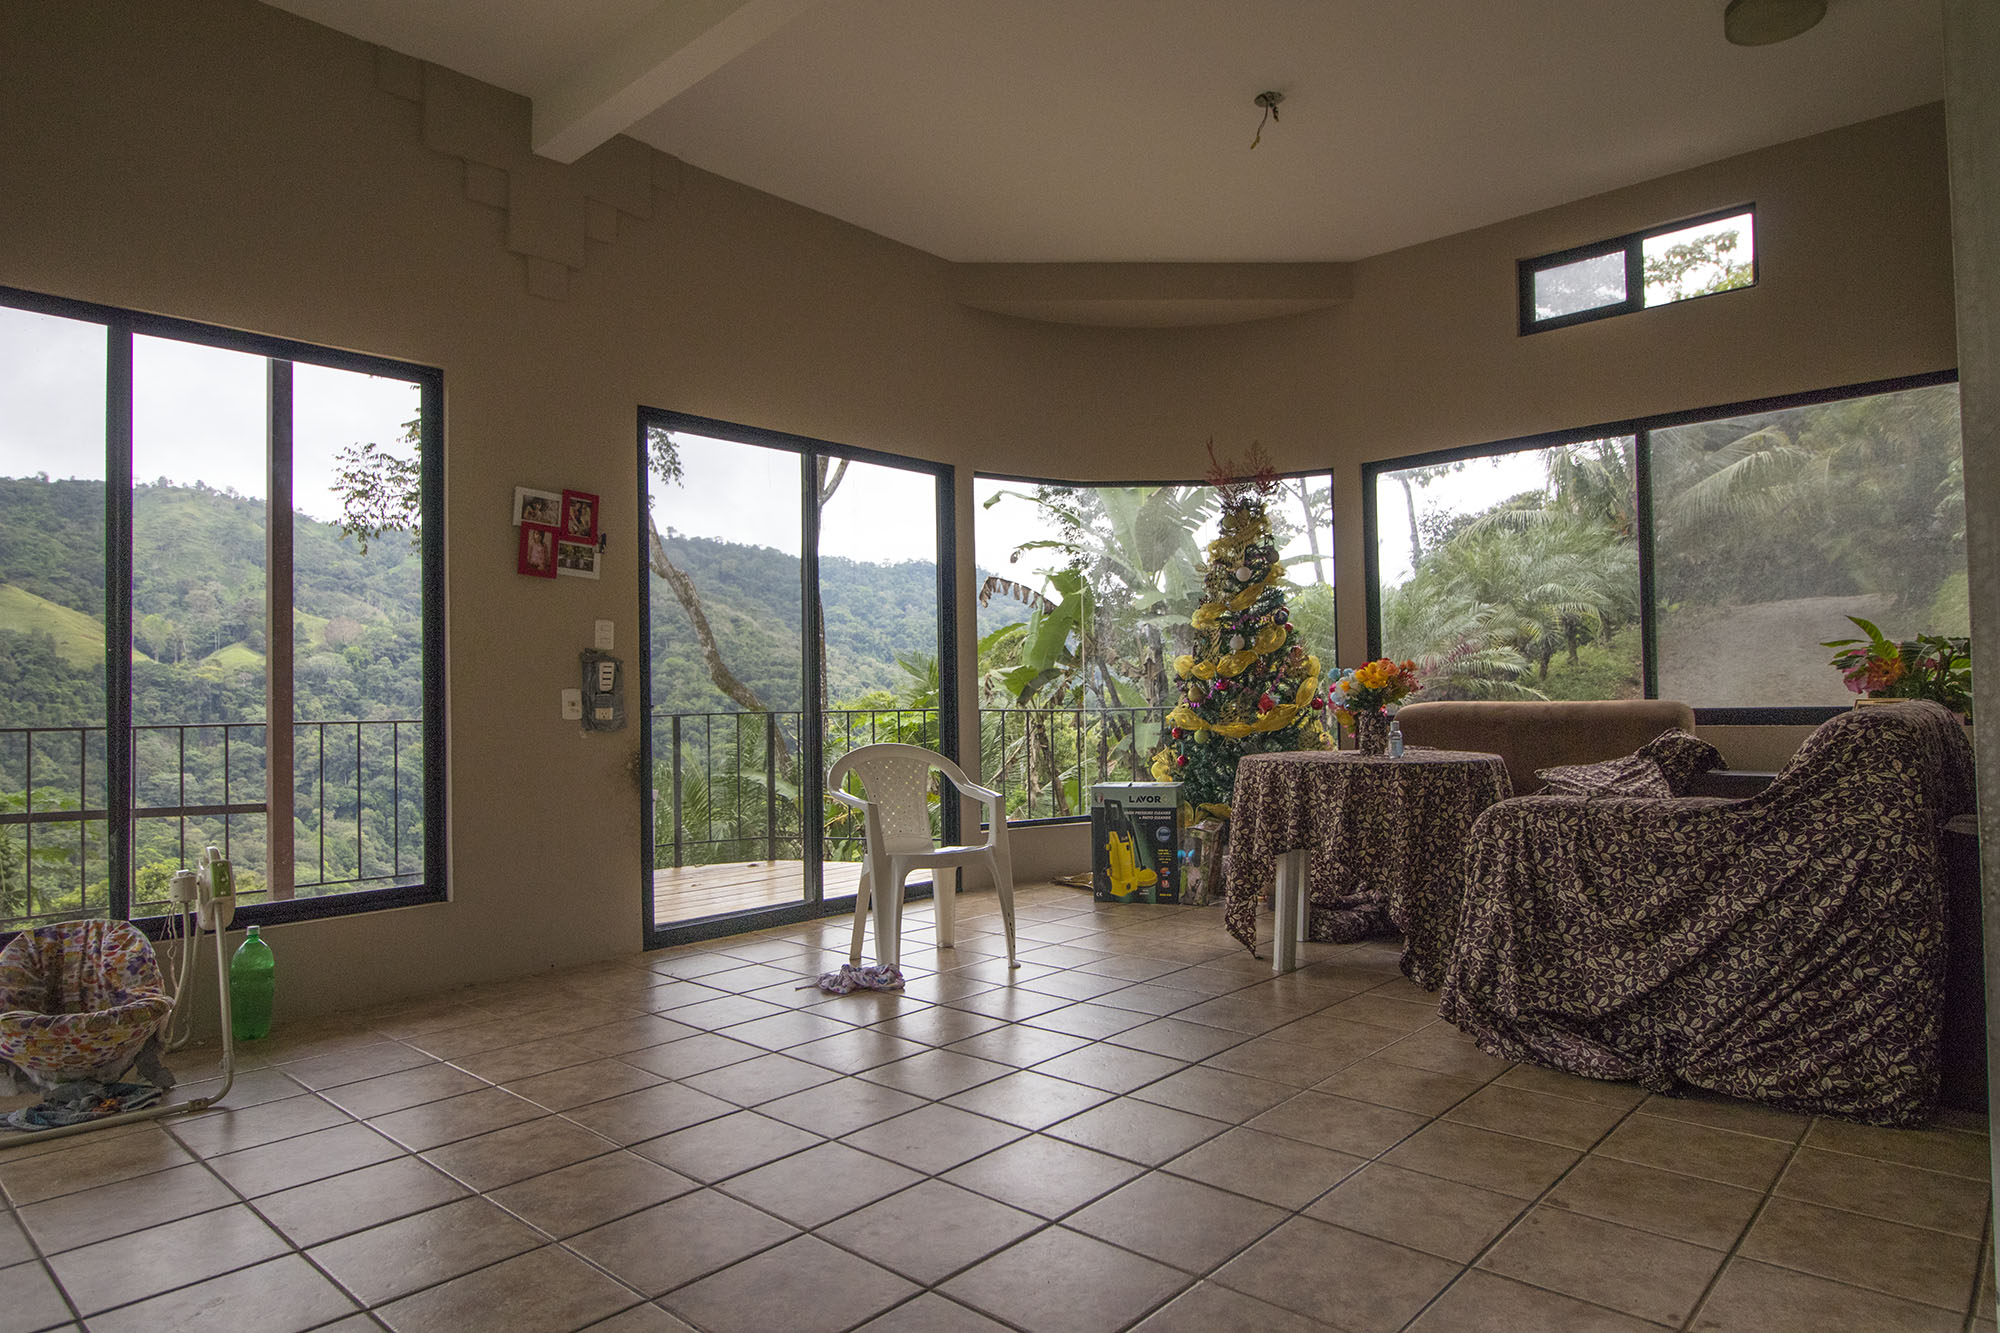 1.24 ACRES - Two Bedroom, Open Architecture, Spectacular Valley and Mountain View, Very Private, 15 Minutes From Dominical!!!